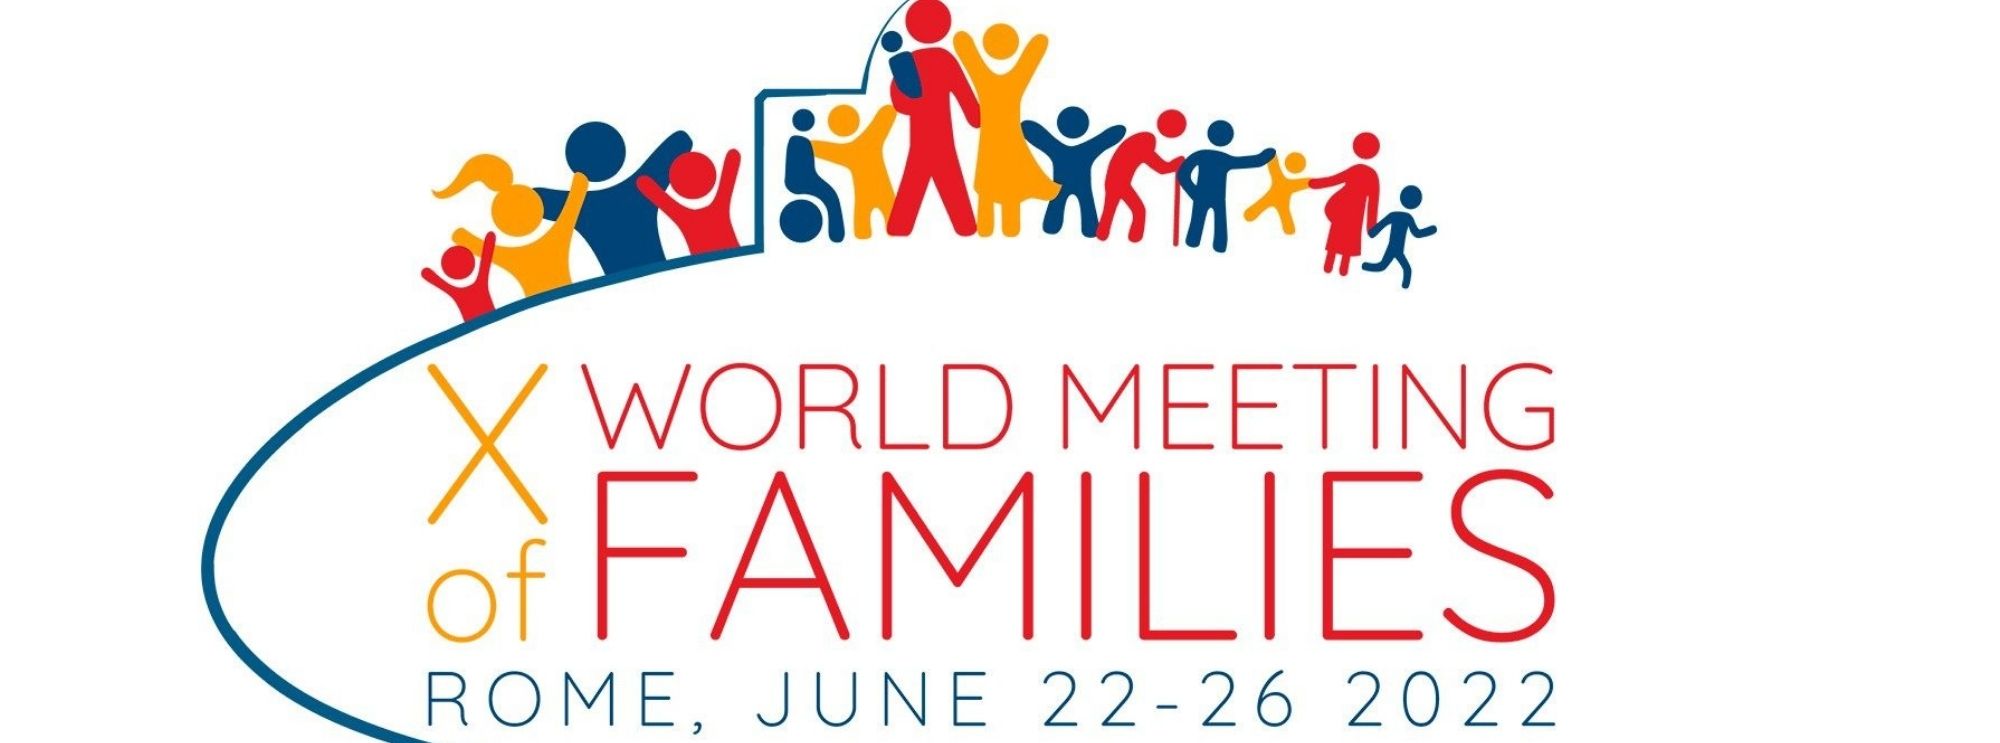 X World Meeting of Families